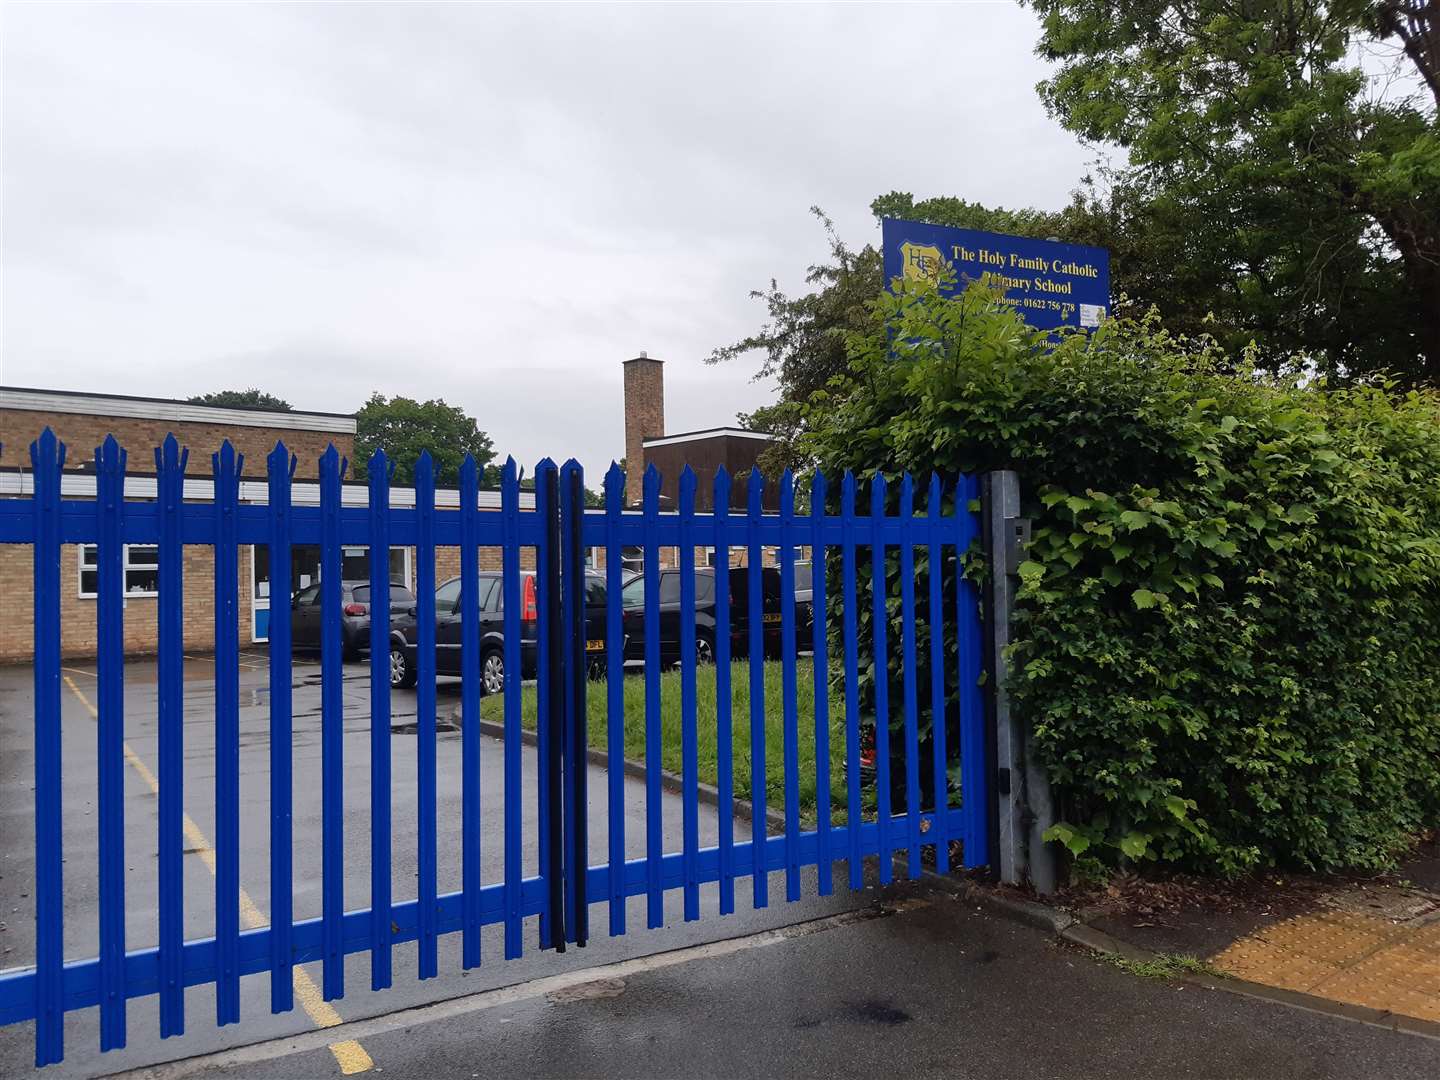 Holy Family RC Primary School is immediately opposite